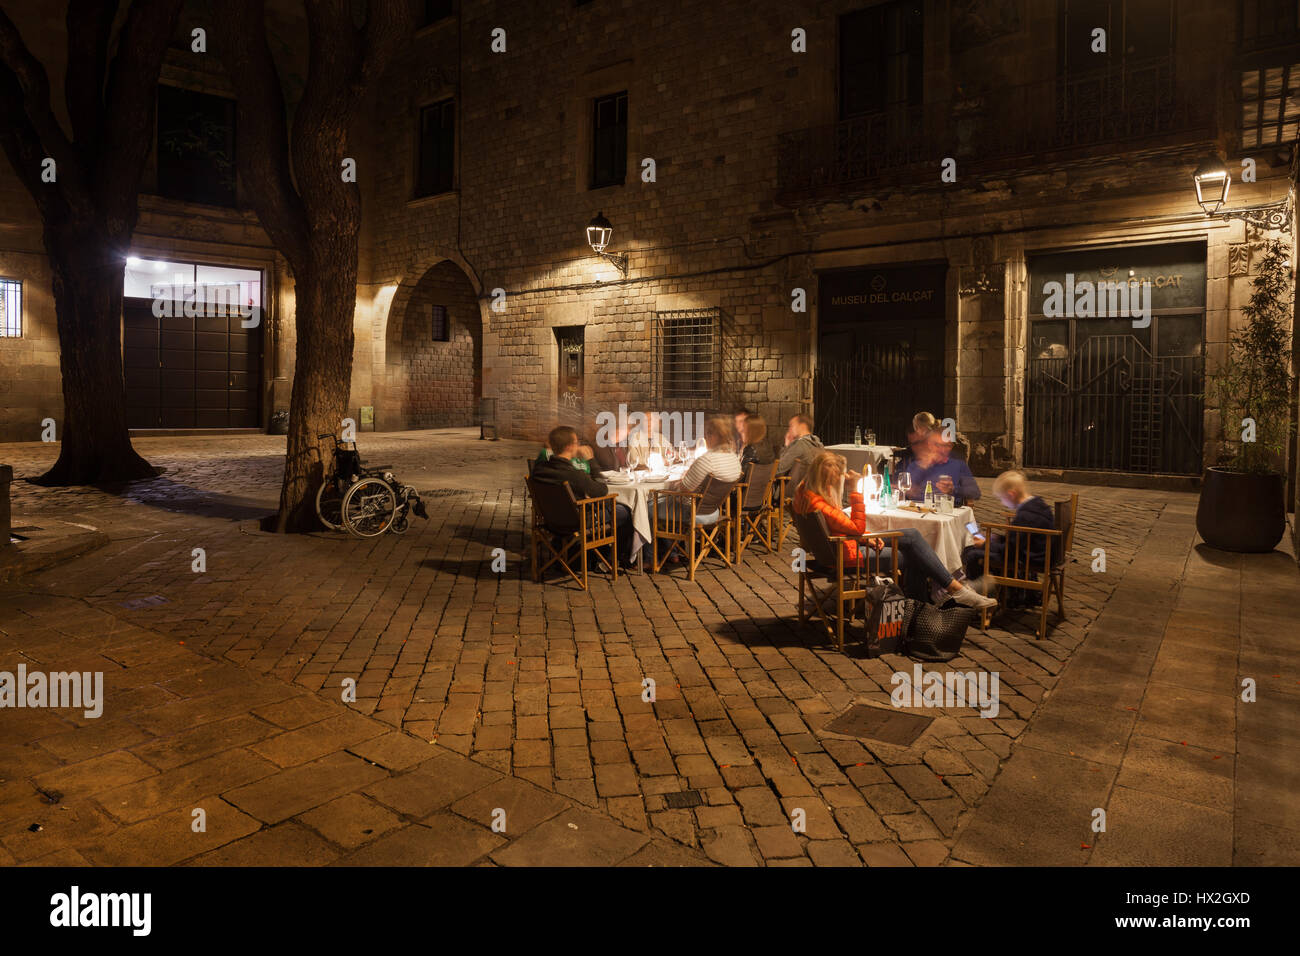 People having supper with wine at outdoor cafe restaurant on Placa Sant Felip Neri square at night in Gothic Quarter of Barcelona, Catalonia, Spain, E Stock Photo